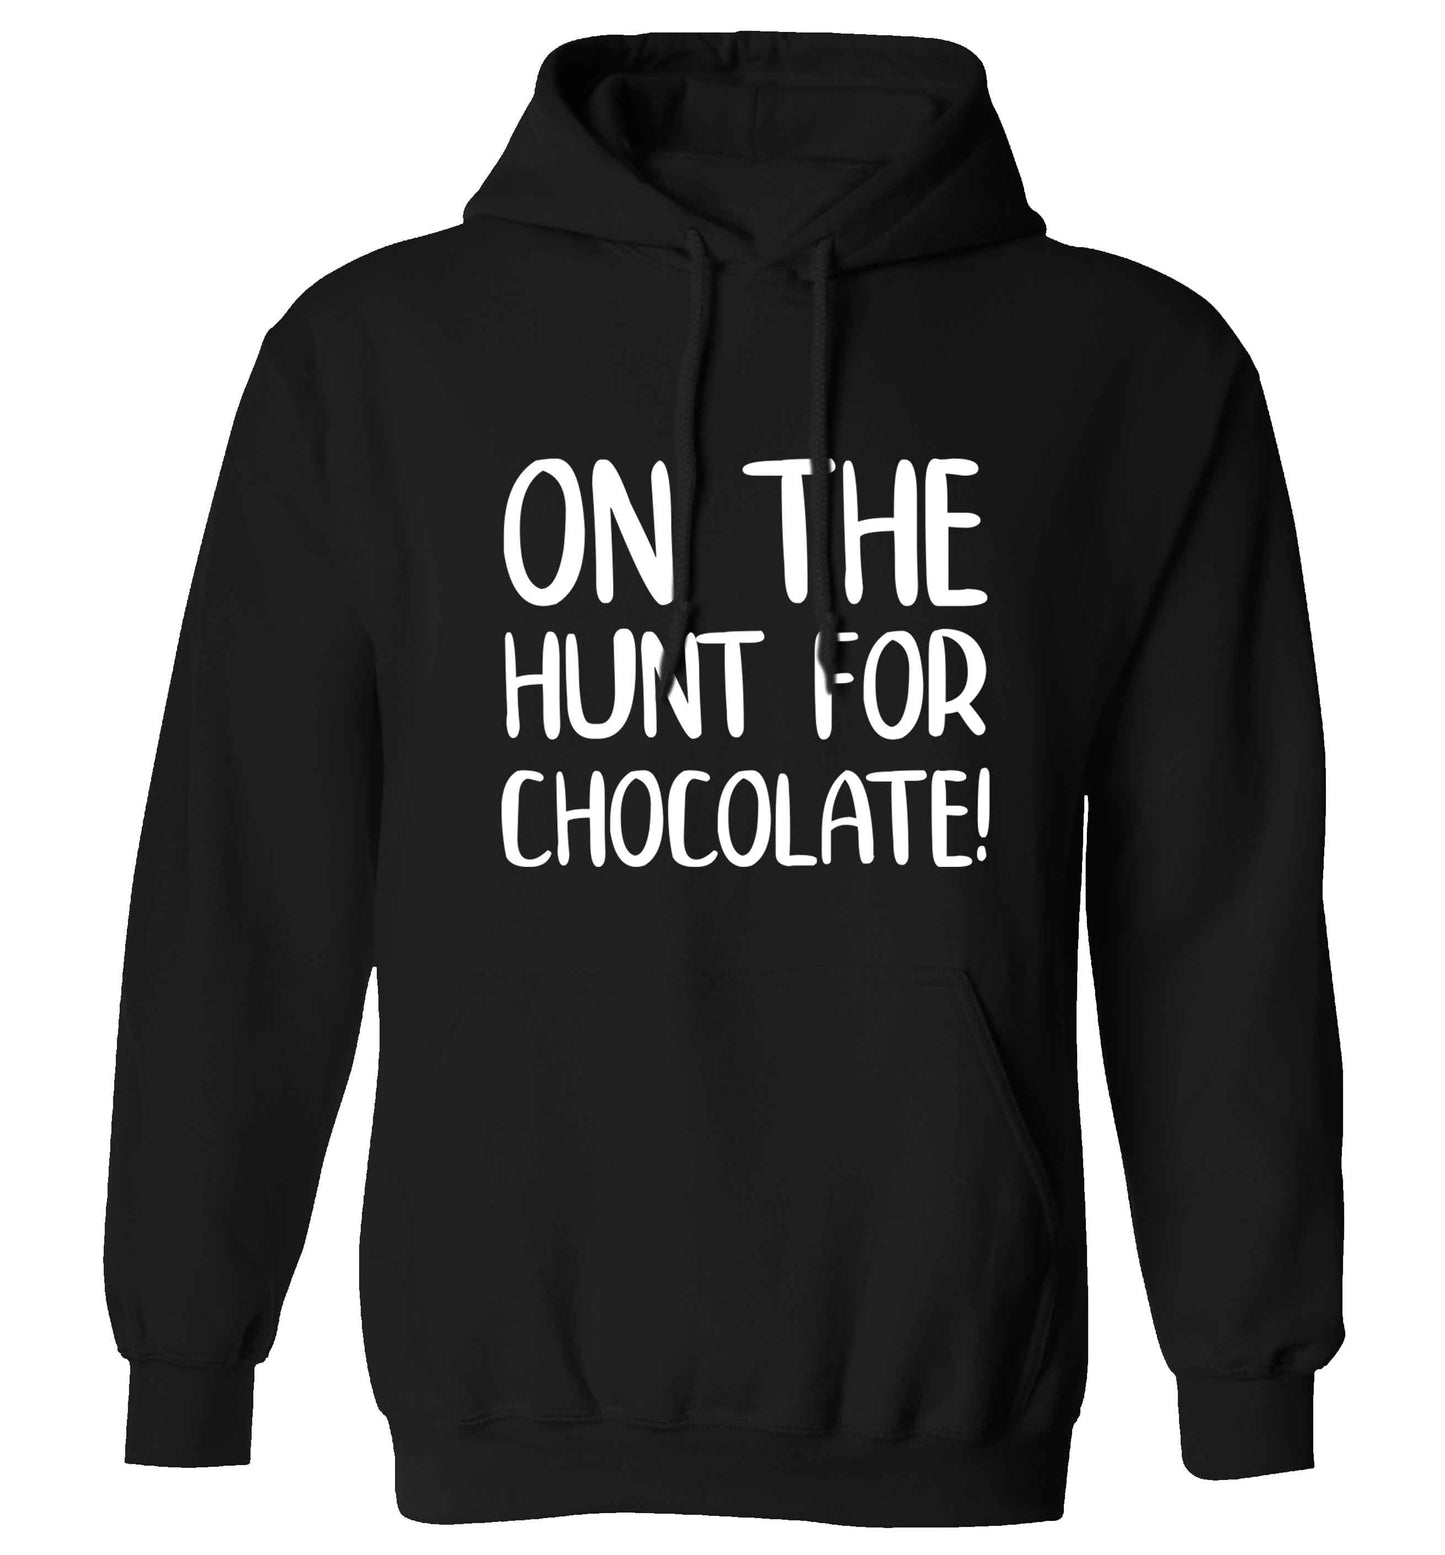 On the hunt for chocolate! adults unisex black hoodie 2XL